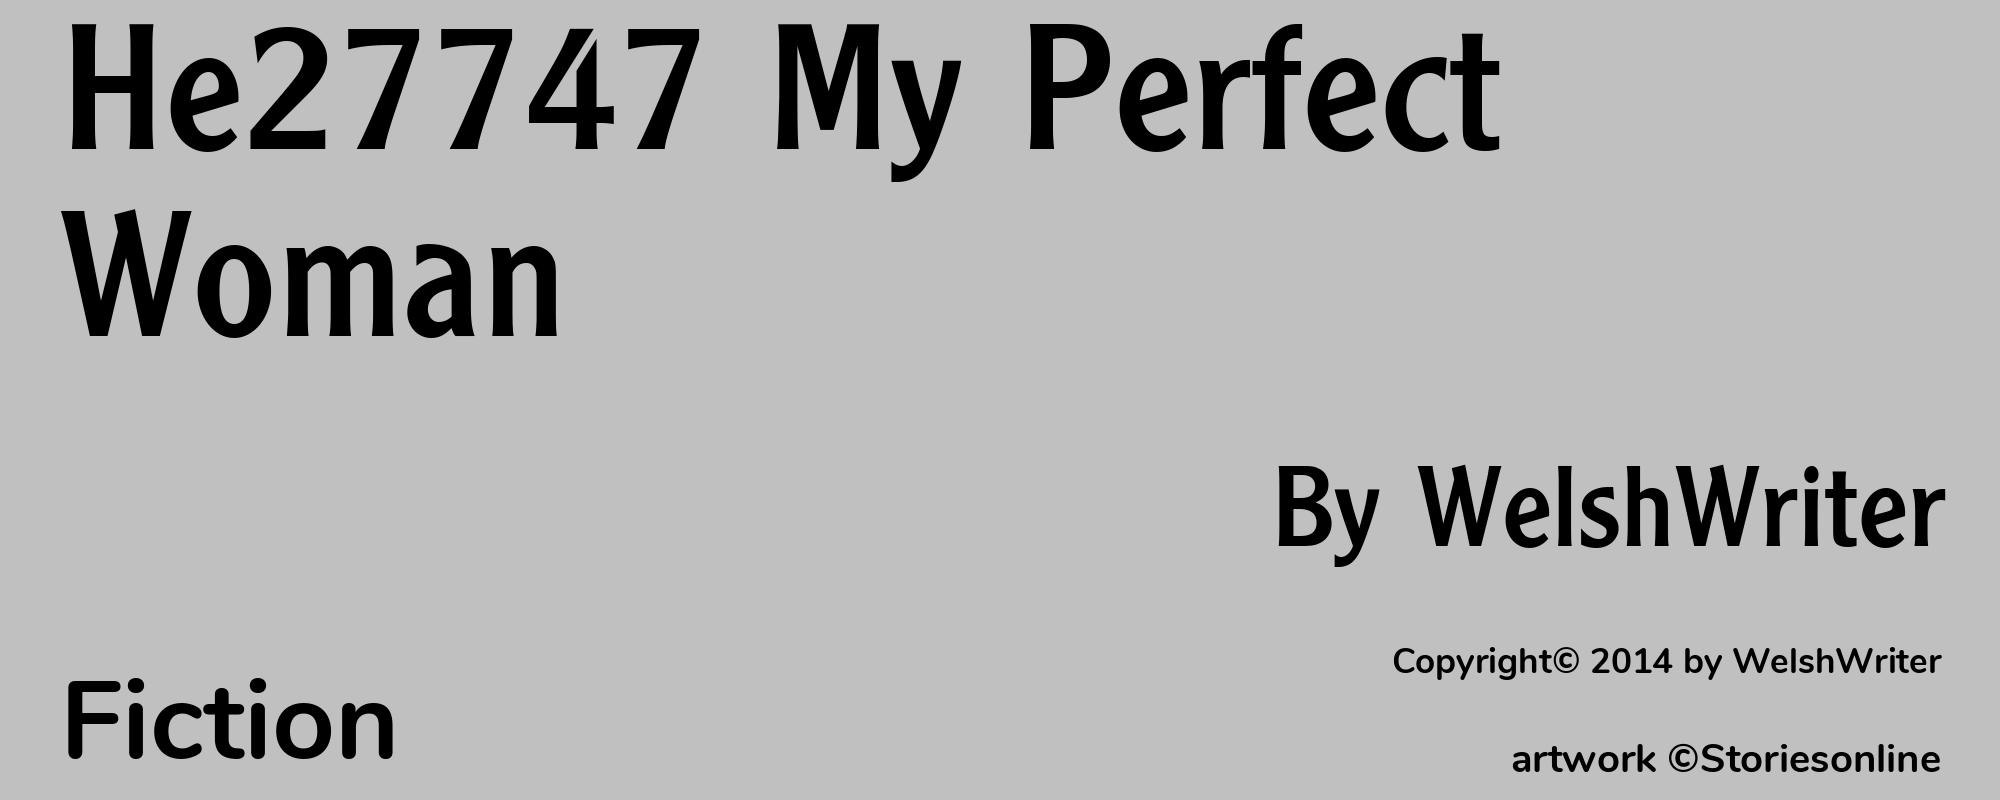 He27747 My Perfect Woman - Cover